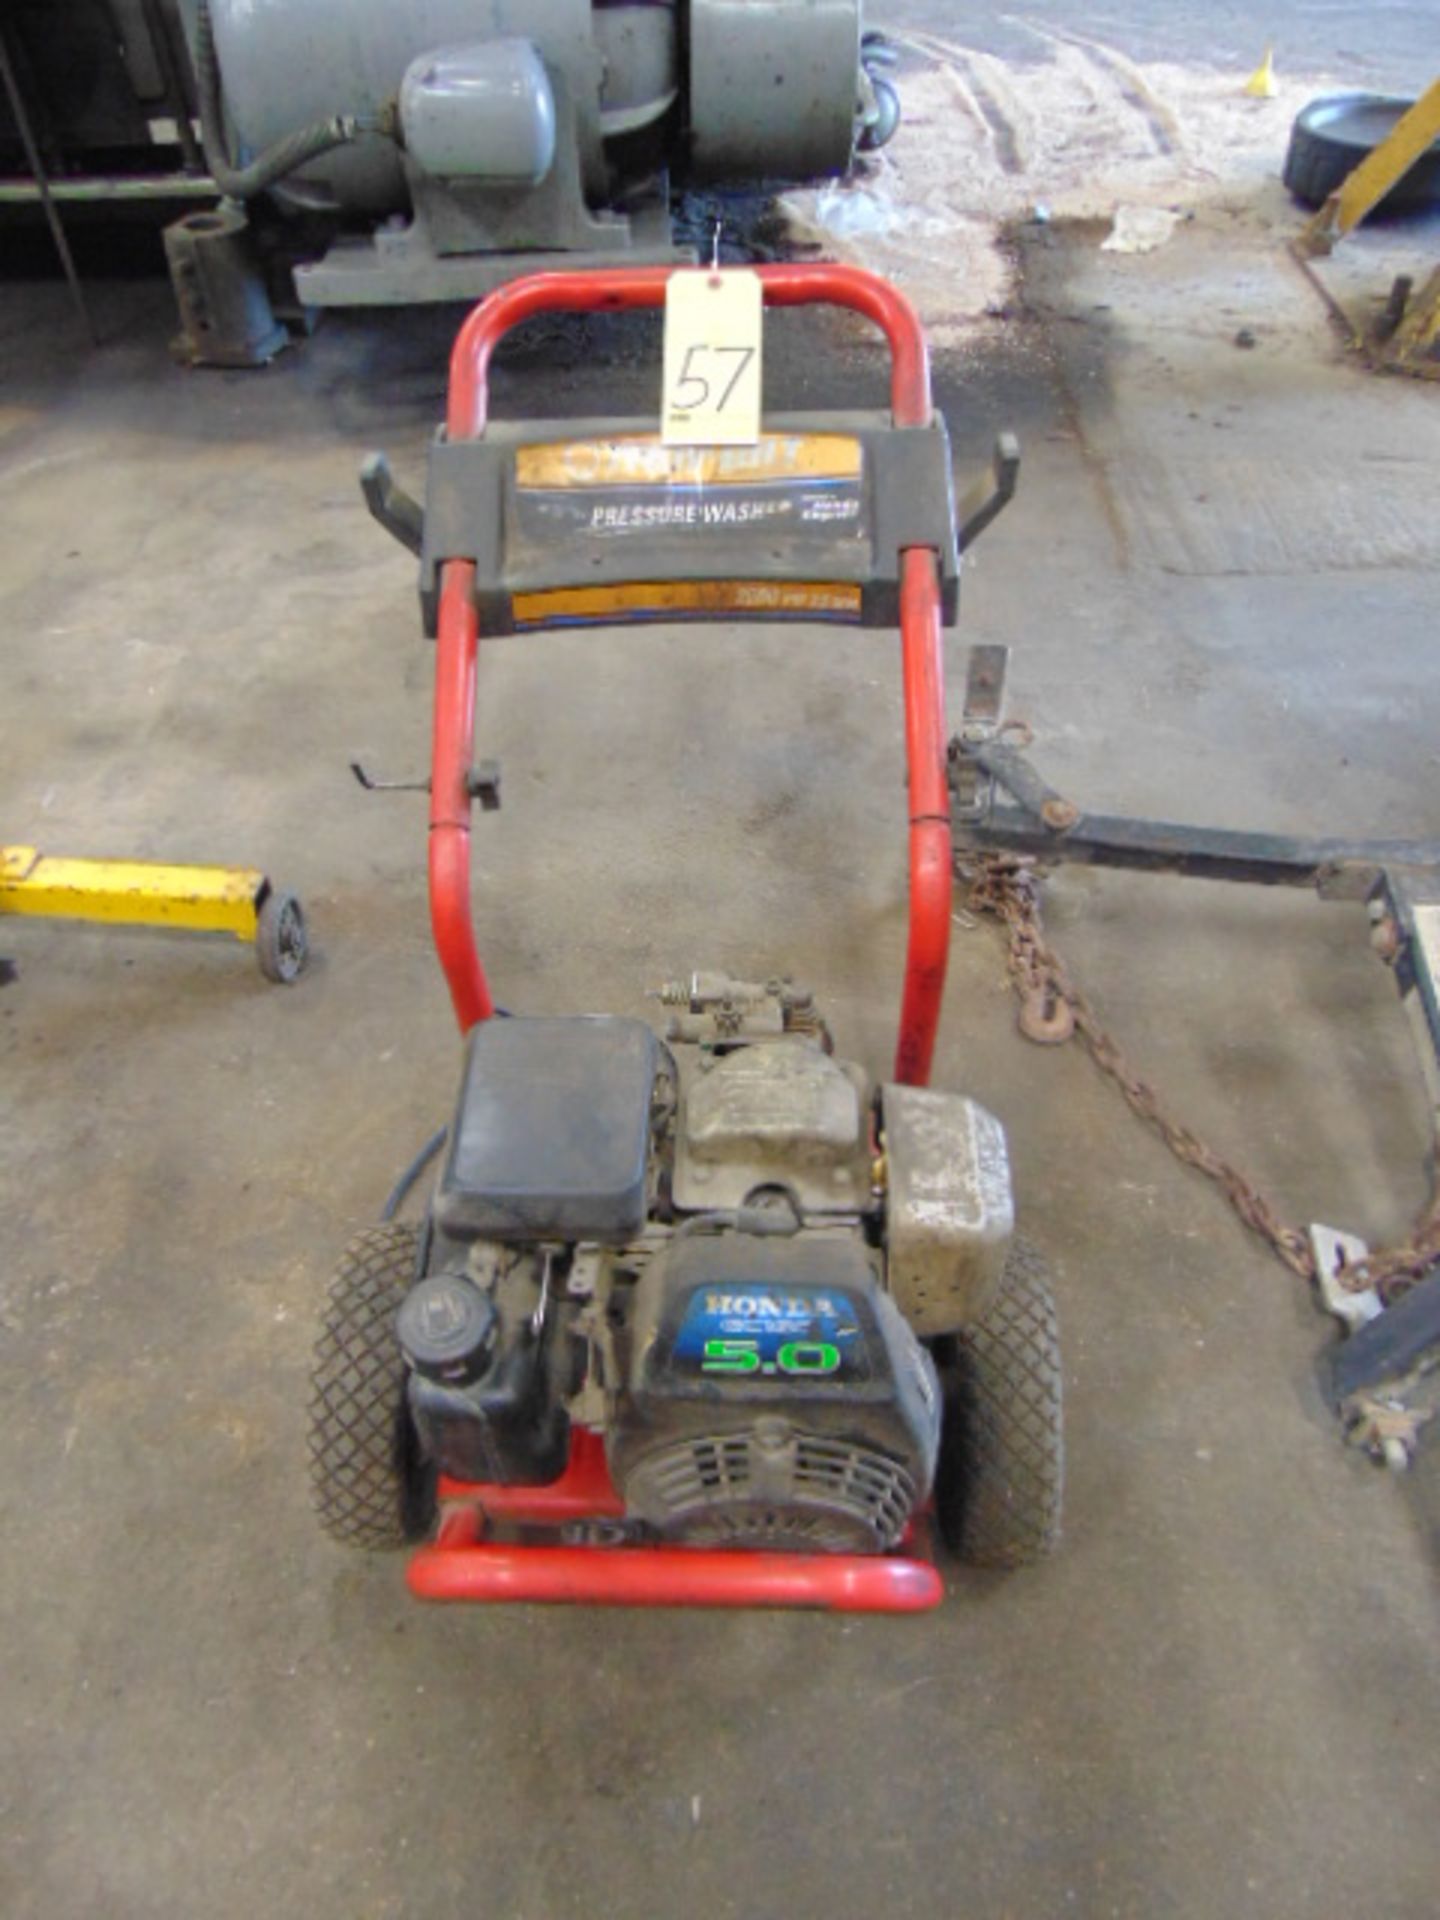 PRESSURE WASHER, TROY-BILT (out of service)